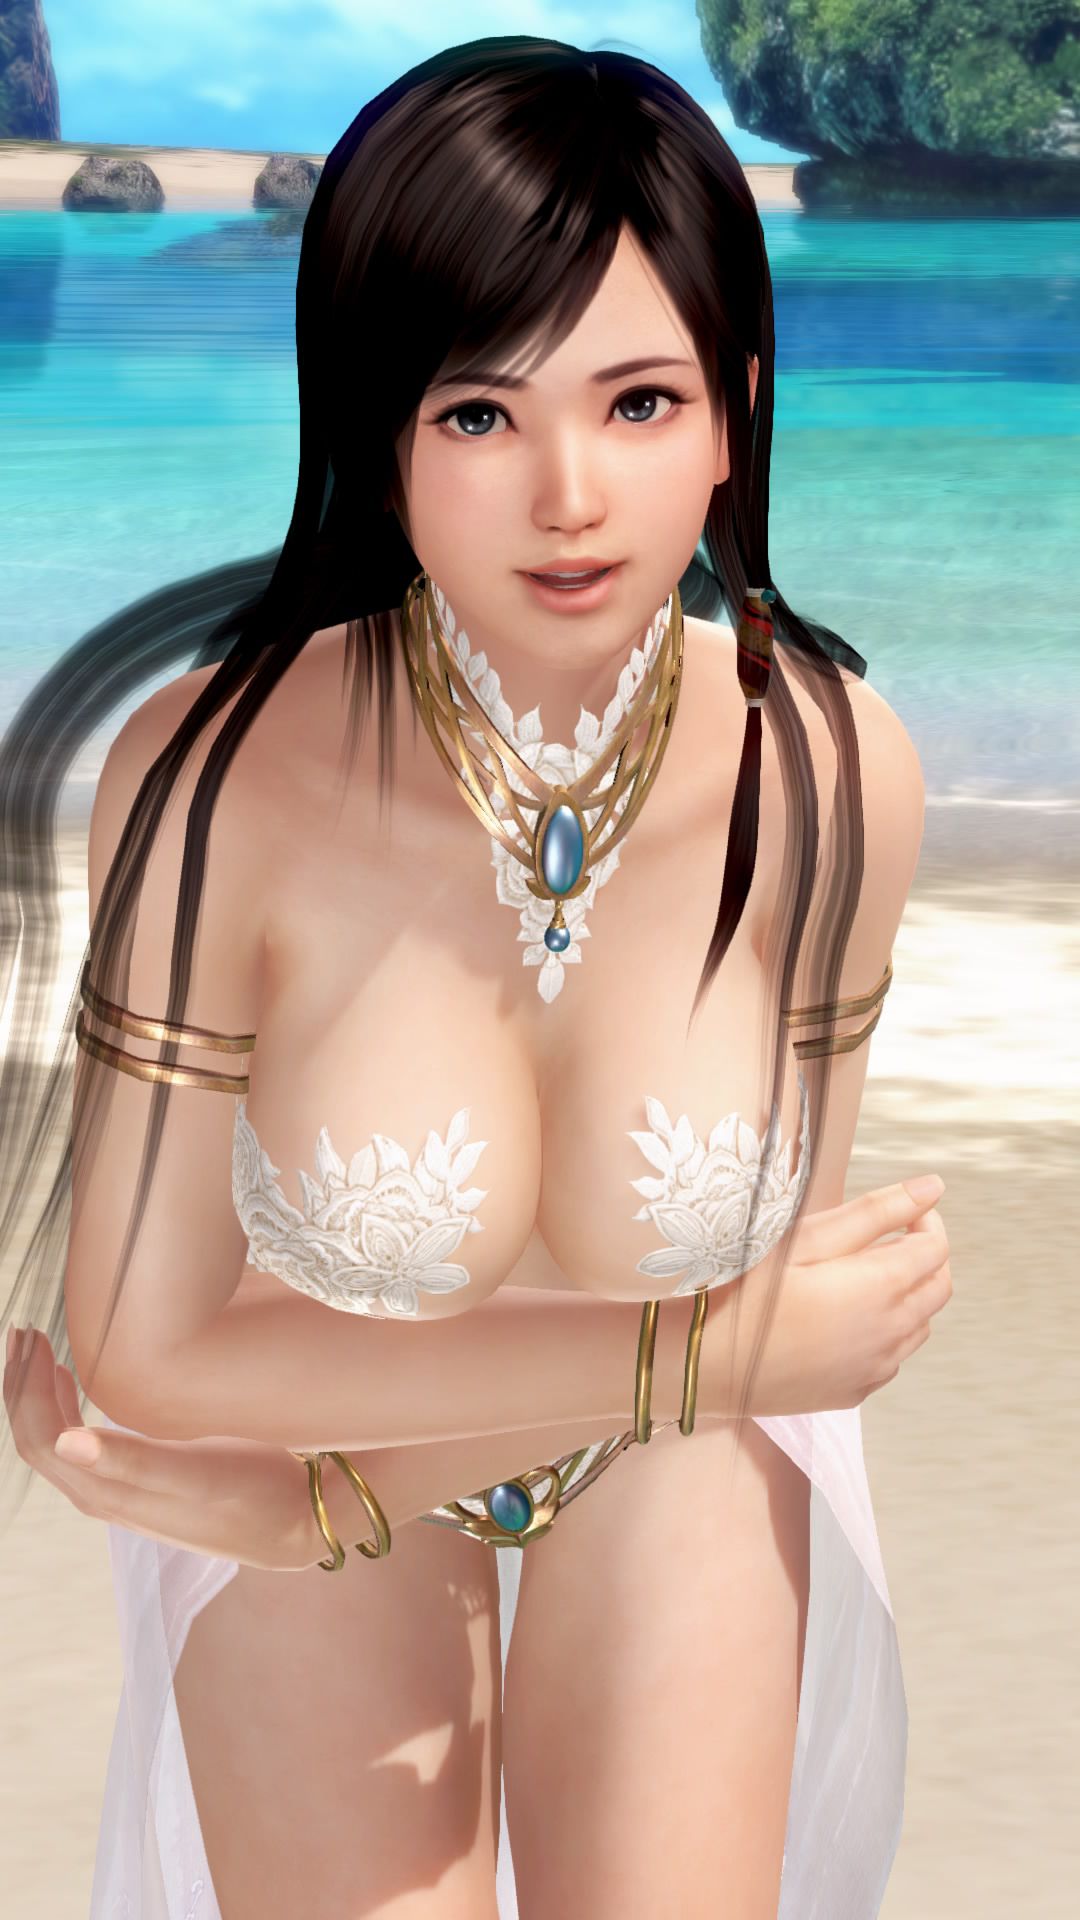 DOAX3 heart has a cute neat and clean system bitch 21